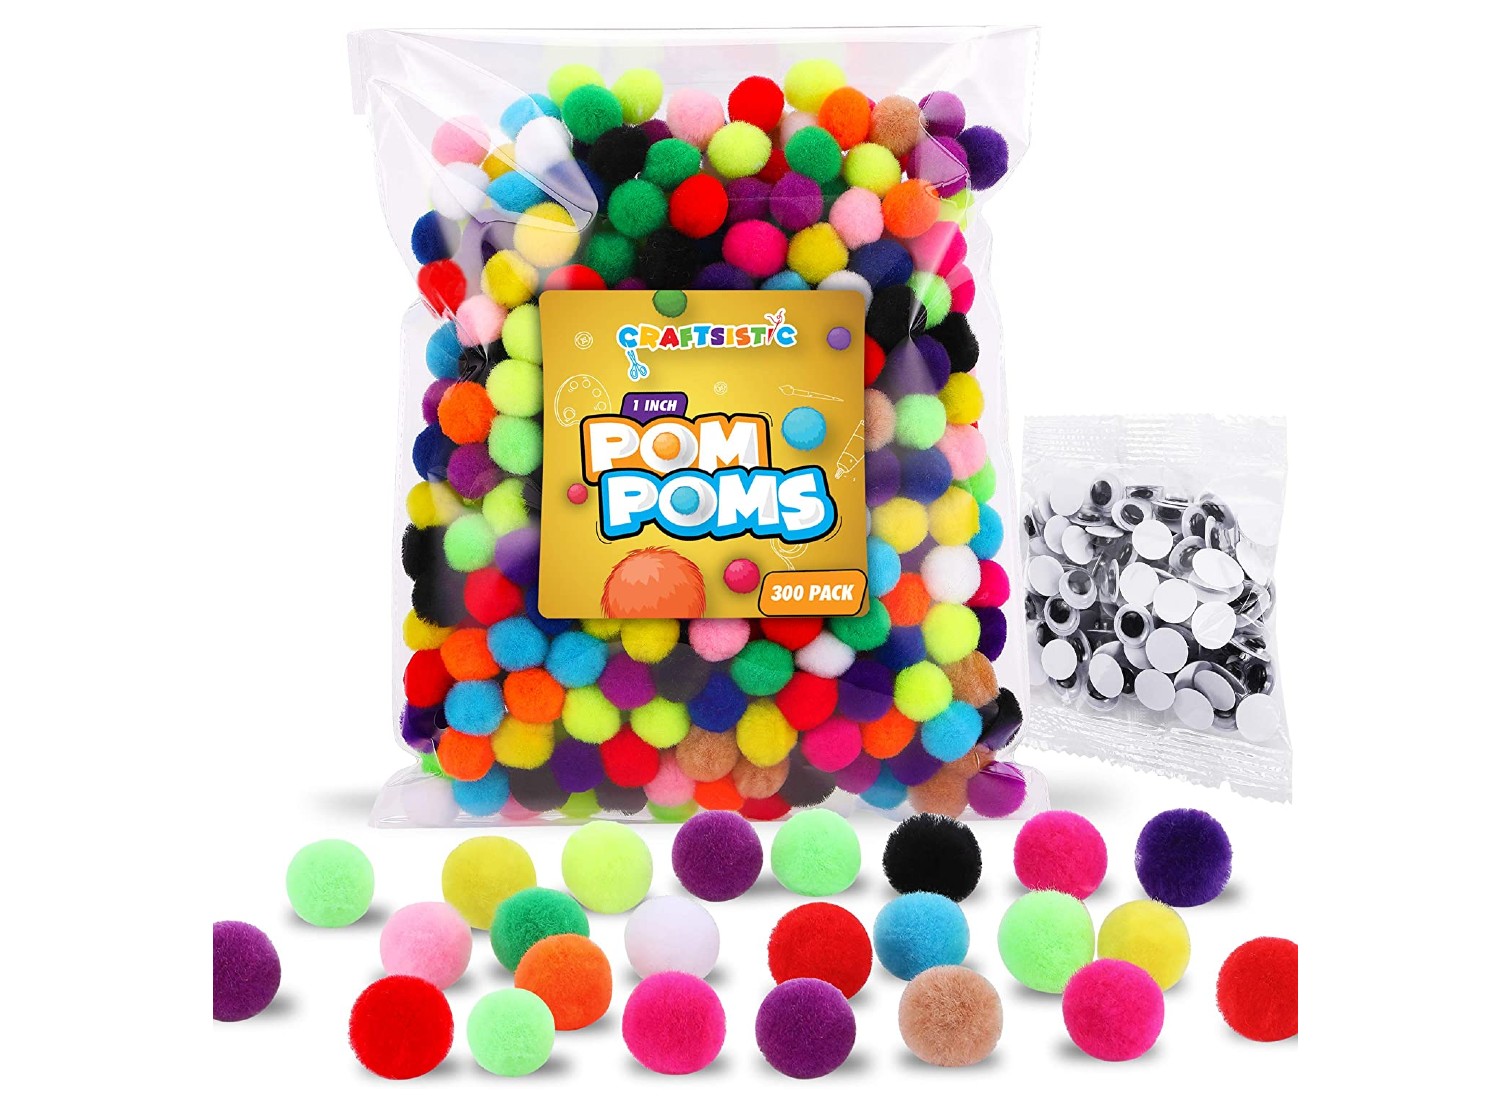 Vibrant Assorted Pompoms for Crafts Zelssi 1600 Pcs – 1400 Assorted Sizes Pom Poms with 100 Googly Eyes and 100 Pipe Cleaners Multi Colored Pom Pom for Arts and Craft Making Decorations 